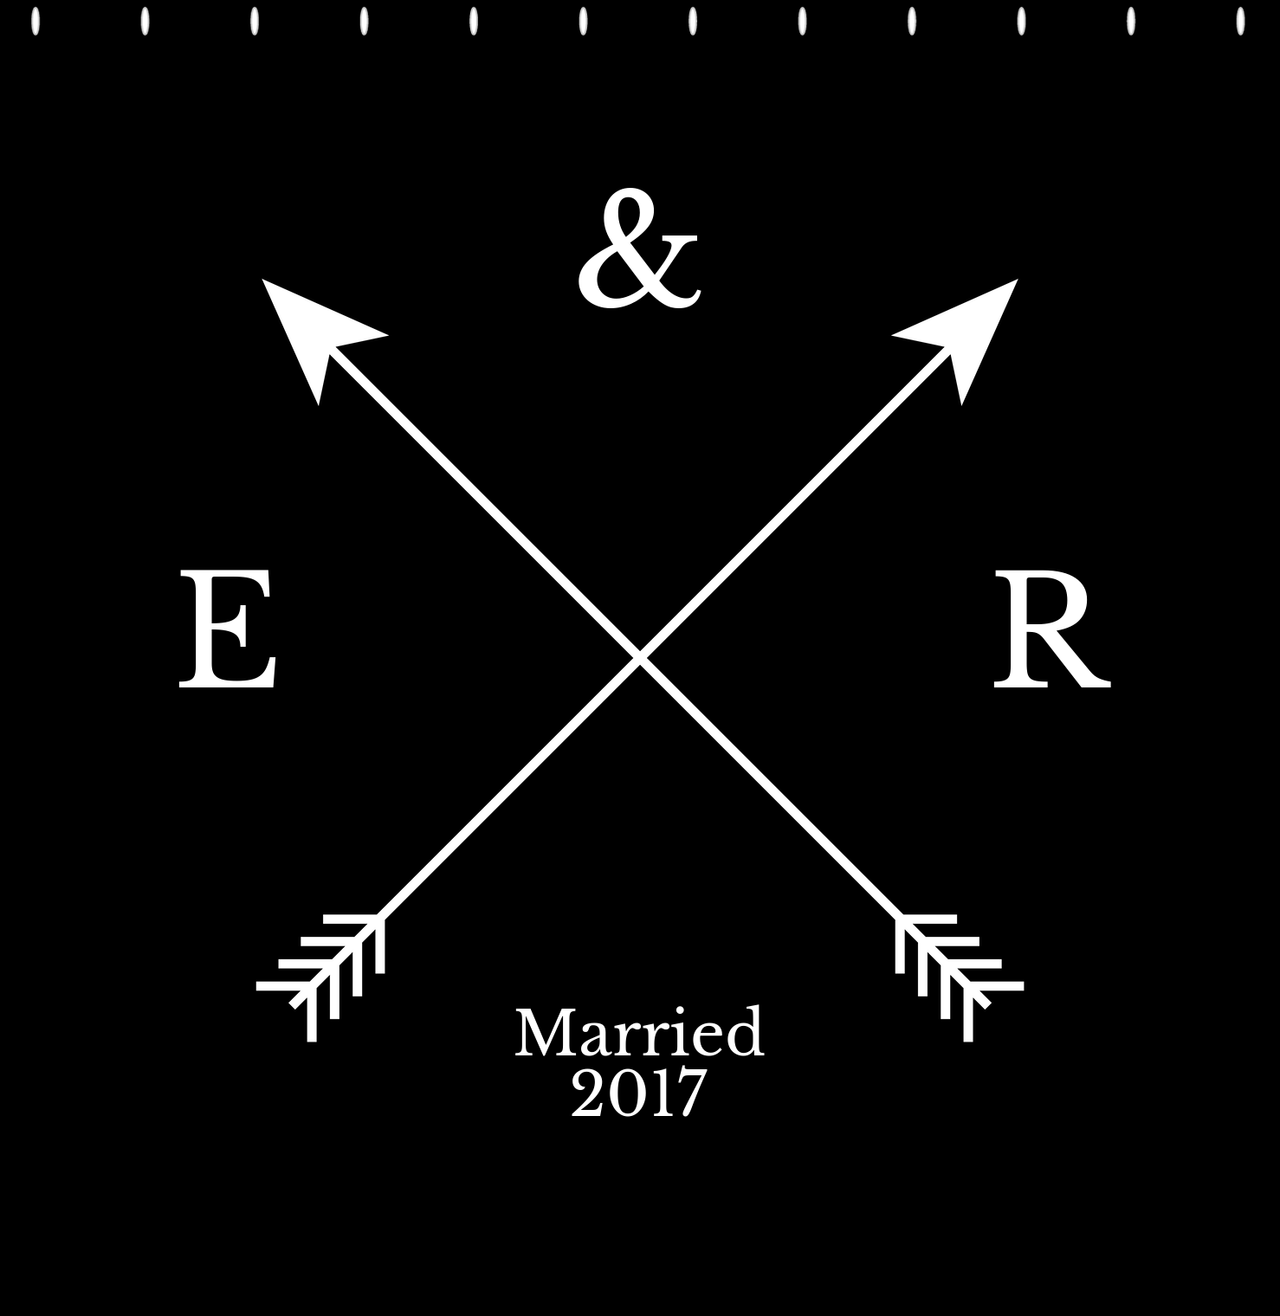 Personalized Arrows Shower Curtain - Black and White - Couple Initials with Wedding Year - Decorate View